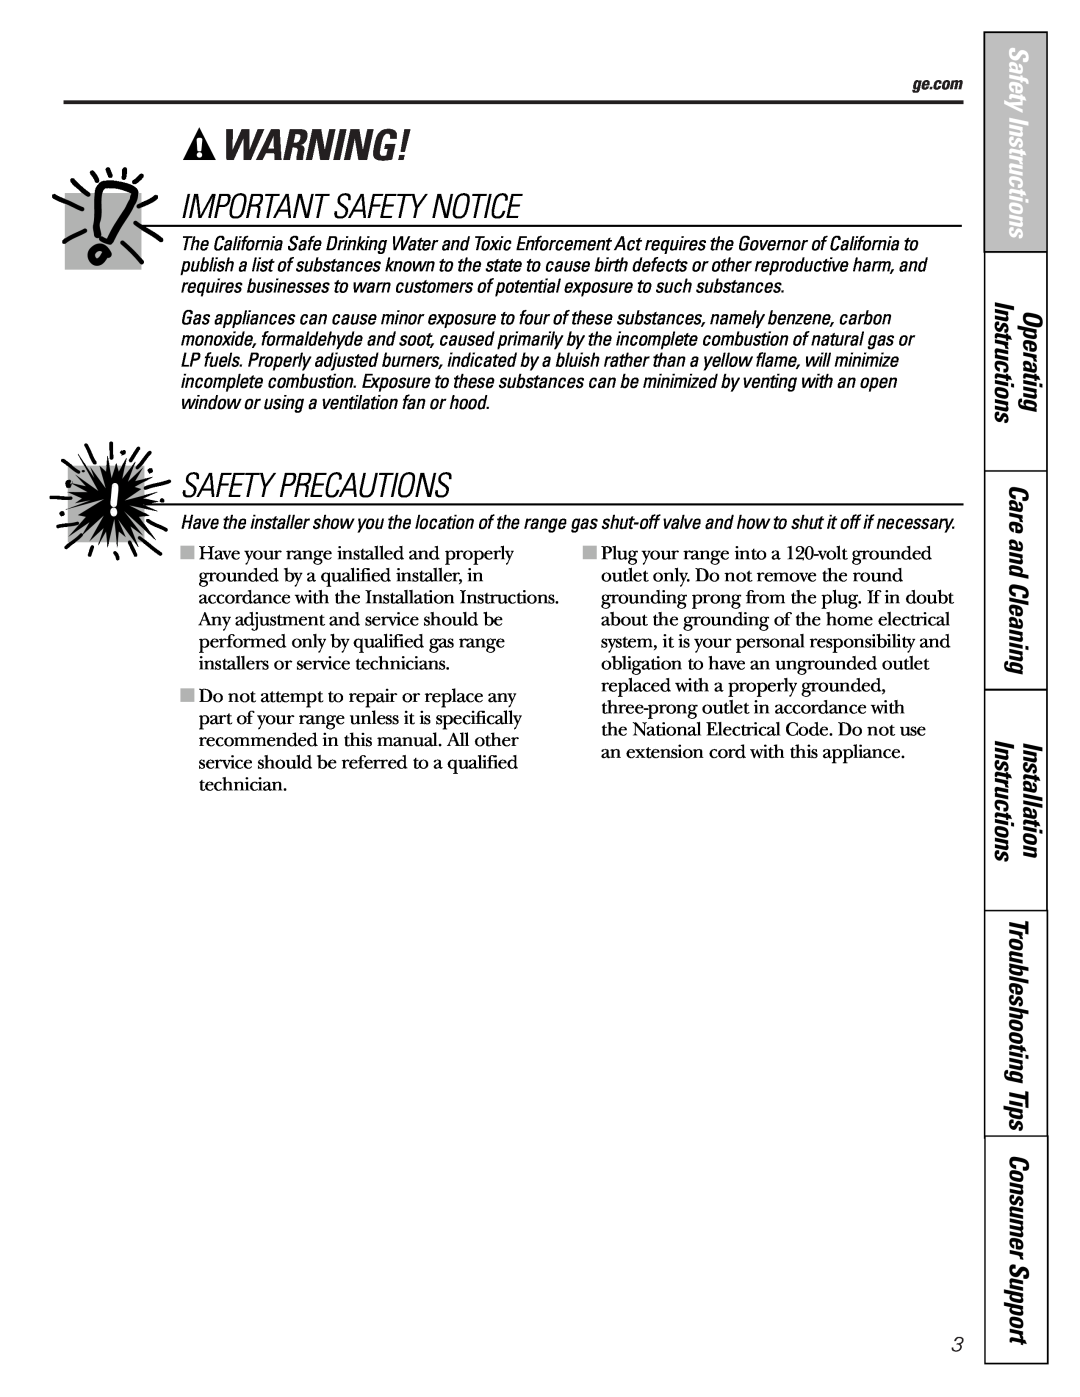 GE JGBP25, JGBP26, JGBP27, JGBP28, JGBP29, JGBP31, JGBP32, JGBP33 manual Important Safety Notice, Safety Precautions, Care 